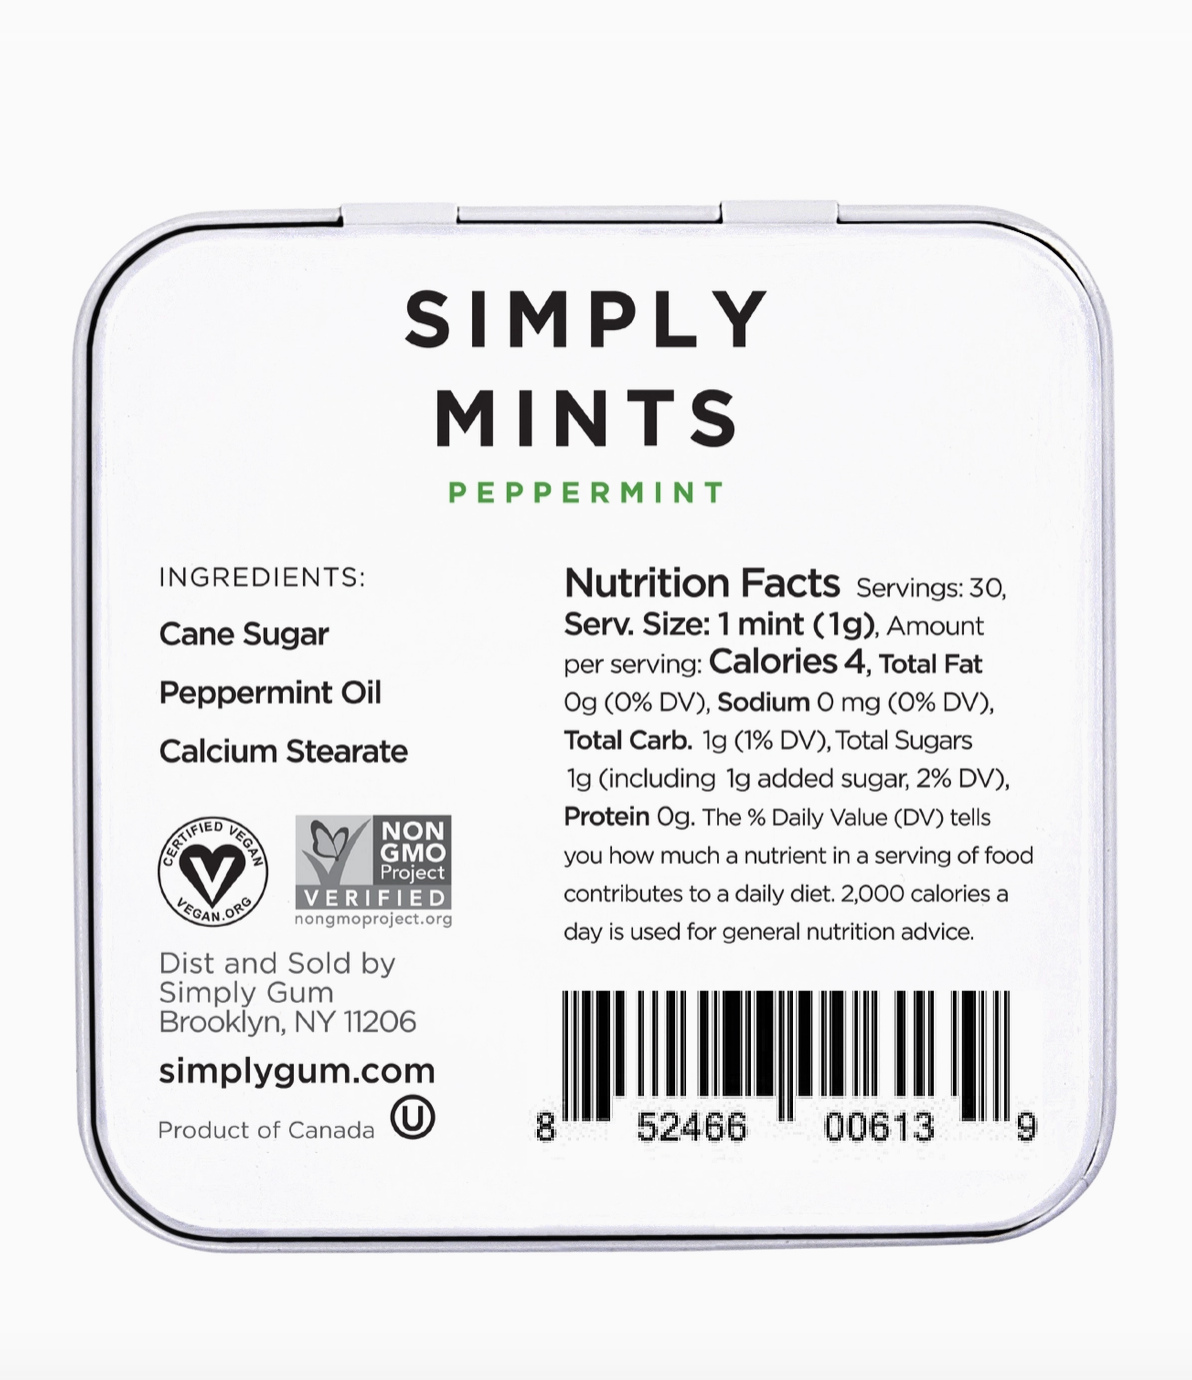 Simply Mints - Peppermint back